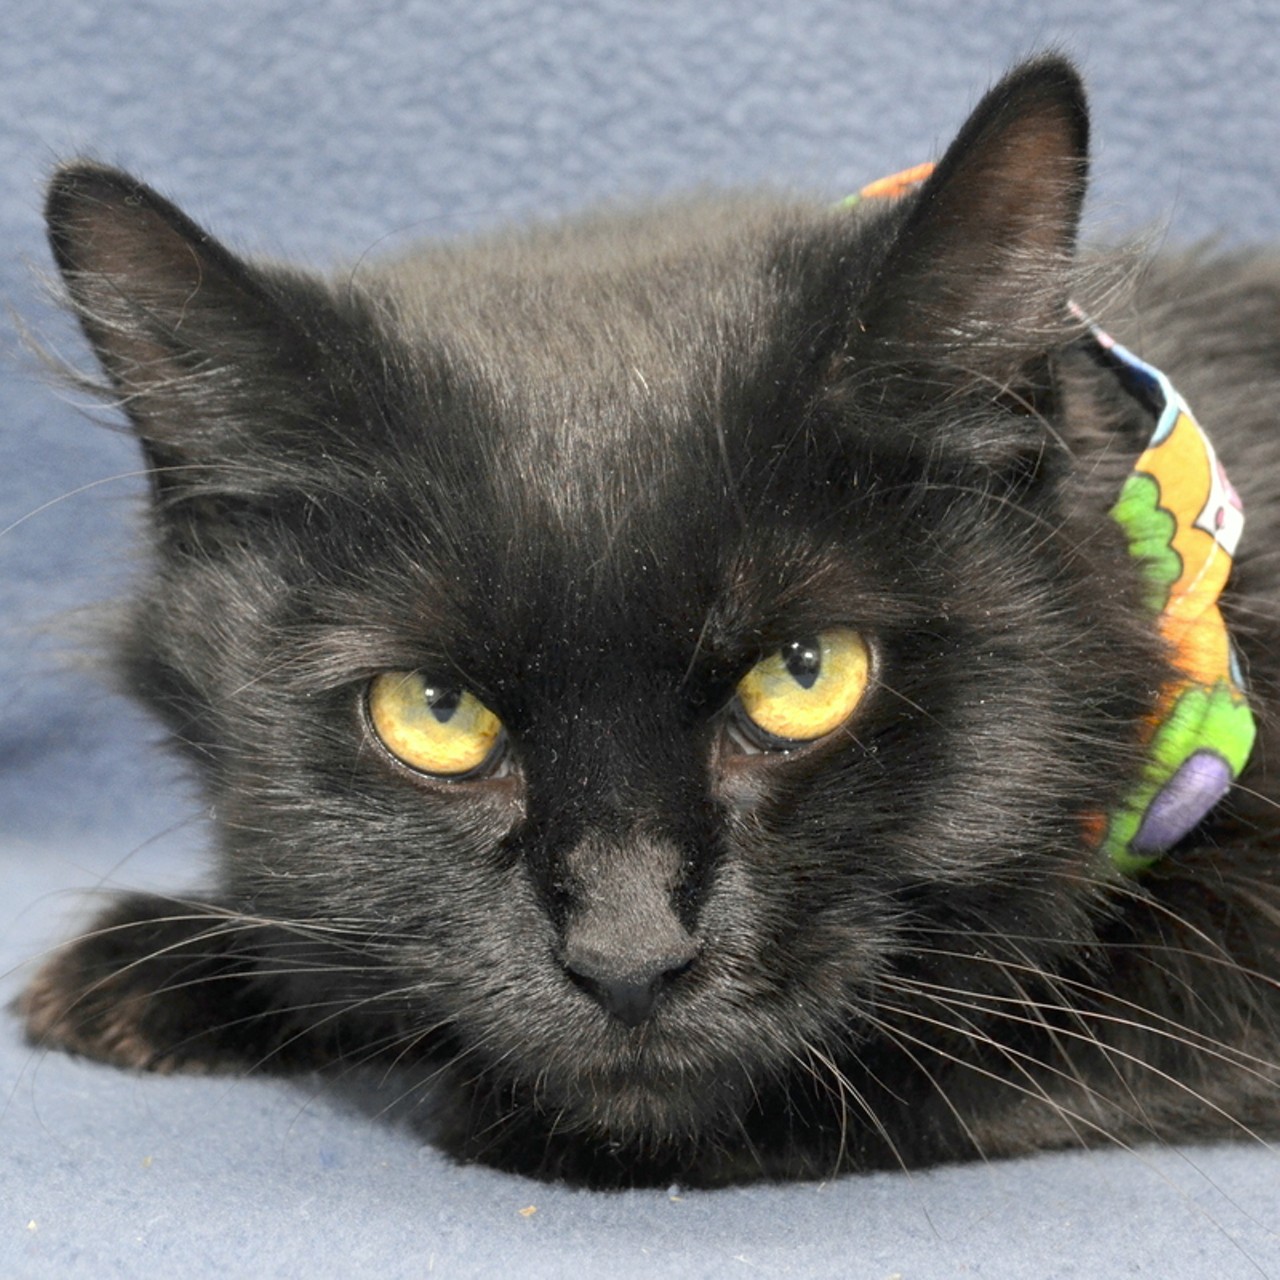 NAME: Pandora
GENDER: Female
BREED: Domestic Medium Hair
AGE: 7 months
WEIGHT: 7 pounds
SPECIAL CONSIDERATIONS: Recovering from skin ailment
REASON I CAME TO MHS: Owner surrender
LOCATION: Berman Center for Animal Care in Westland
ID NUMBER: 866975